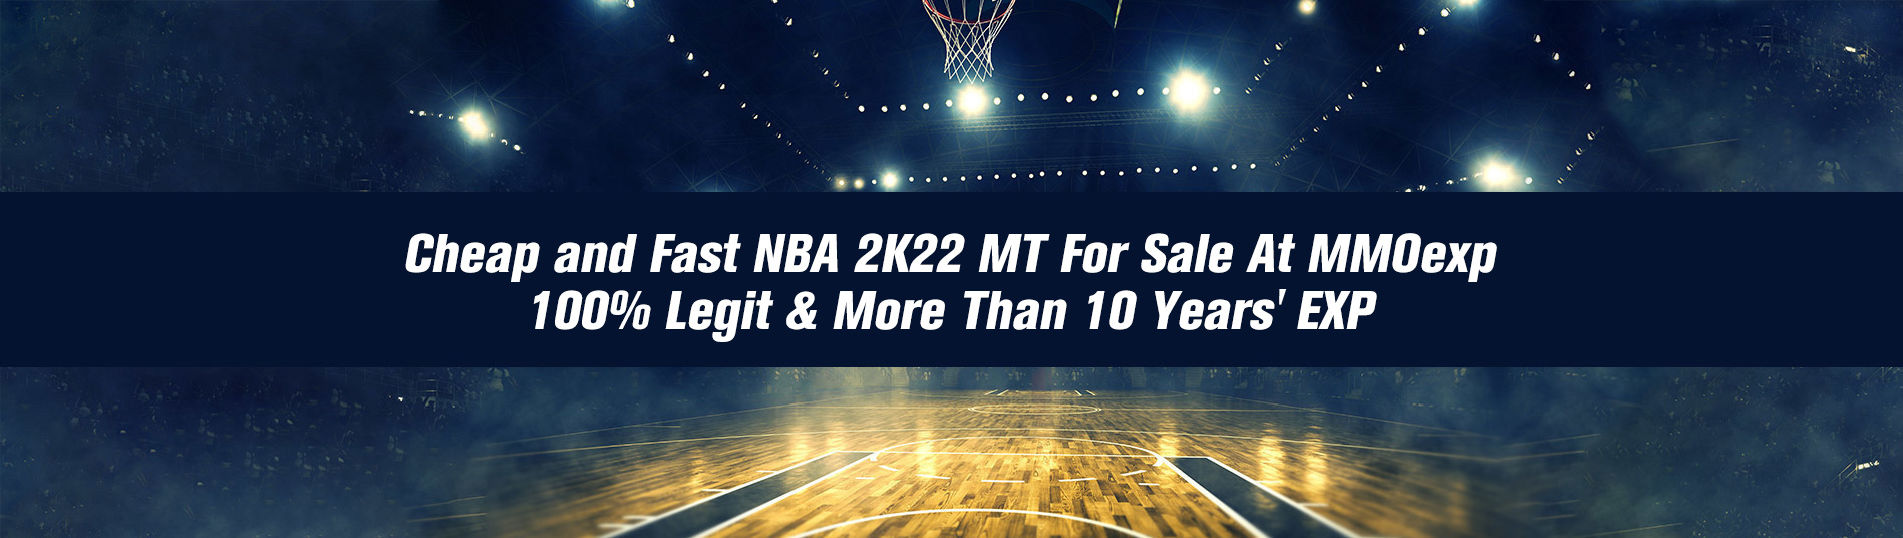 Cheap and Fast NBA 2K22 MT For Sale At MMOexp